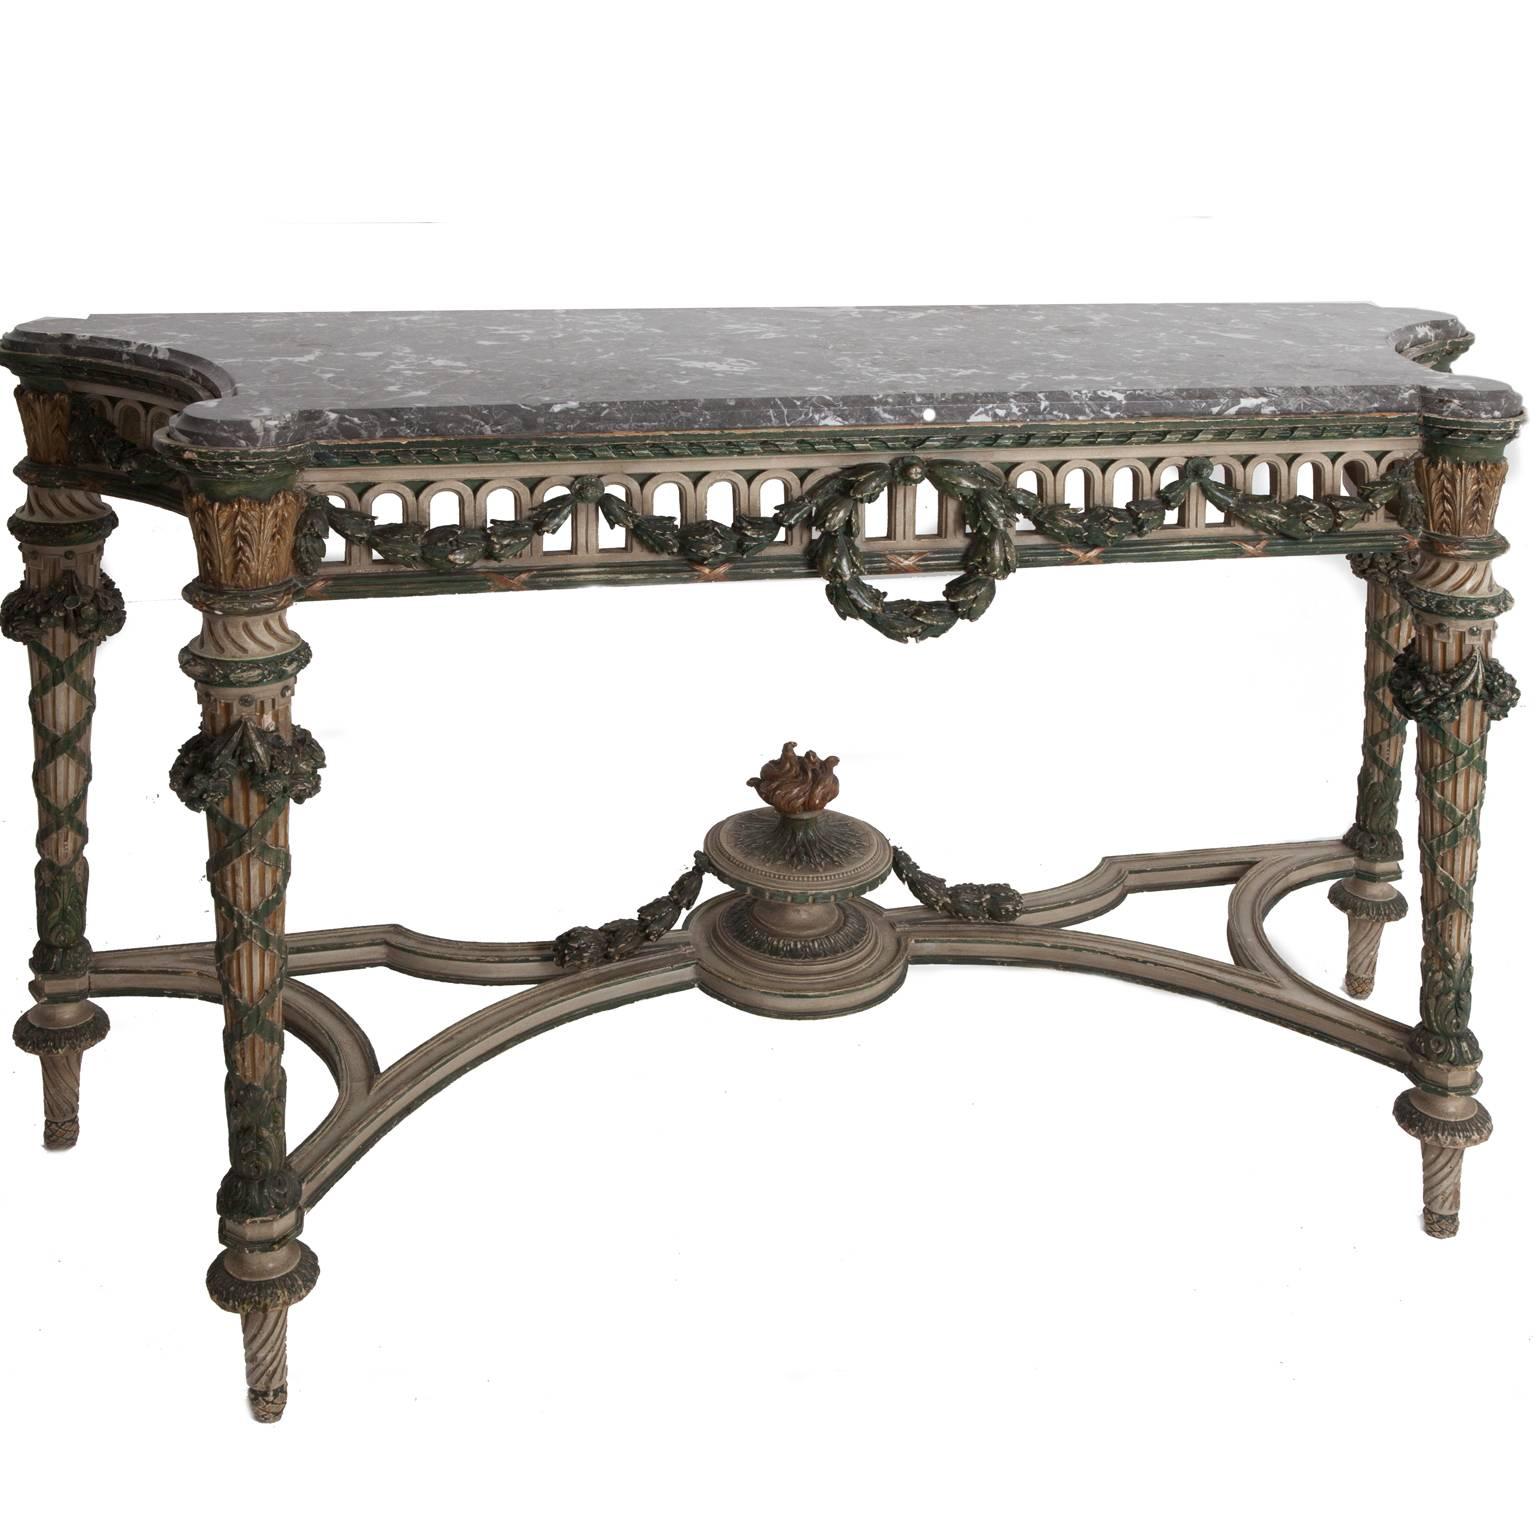 Late 19th century Italian console table. Painted and parcel-gilt with pierced frieze on fluted stretched supports with St Anne’s veined grey marble top. Salvaged from an English manor house.
 